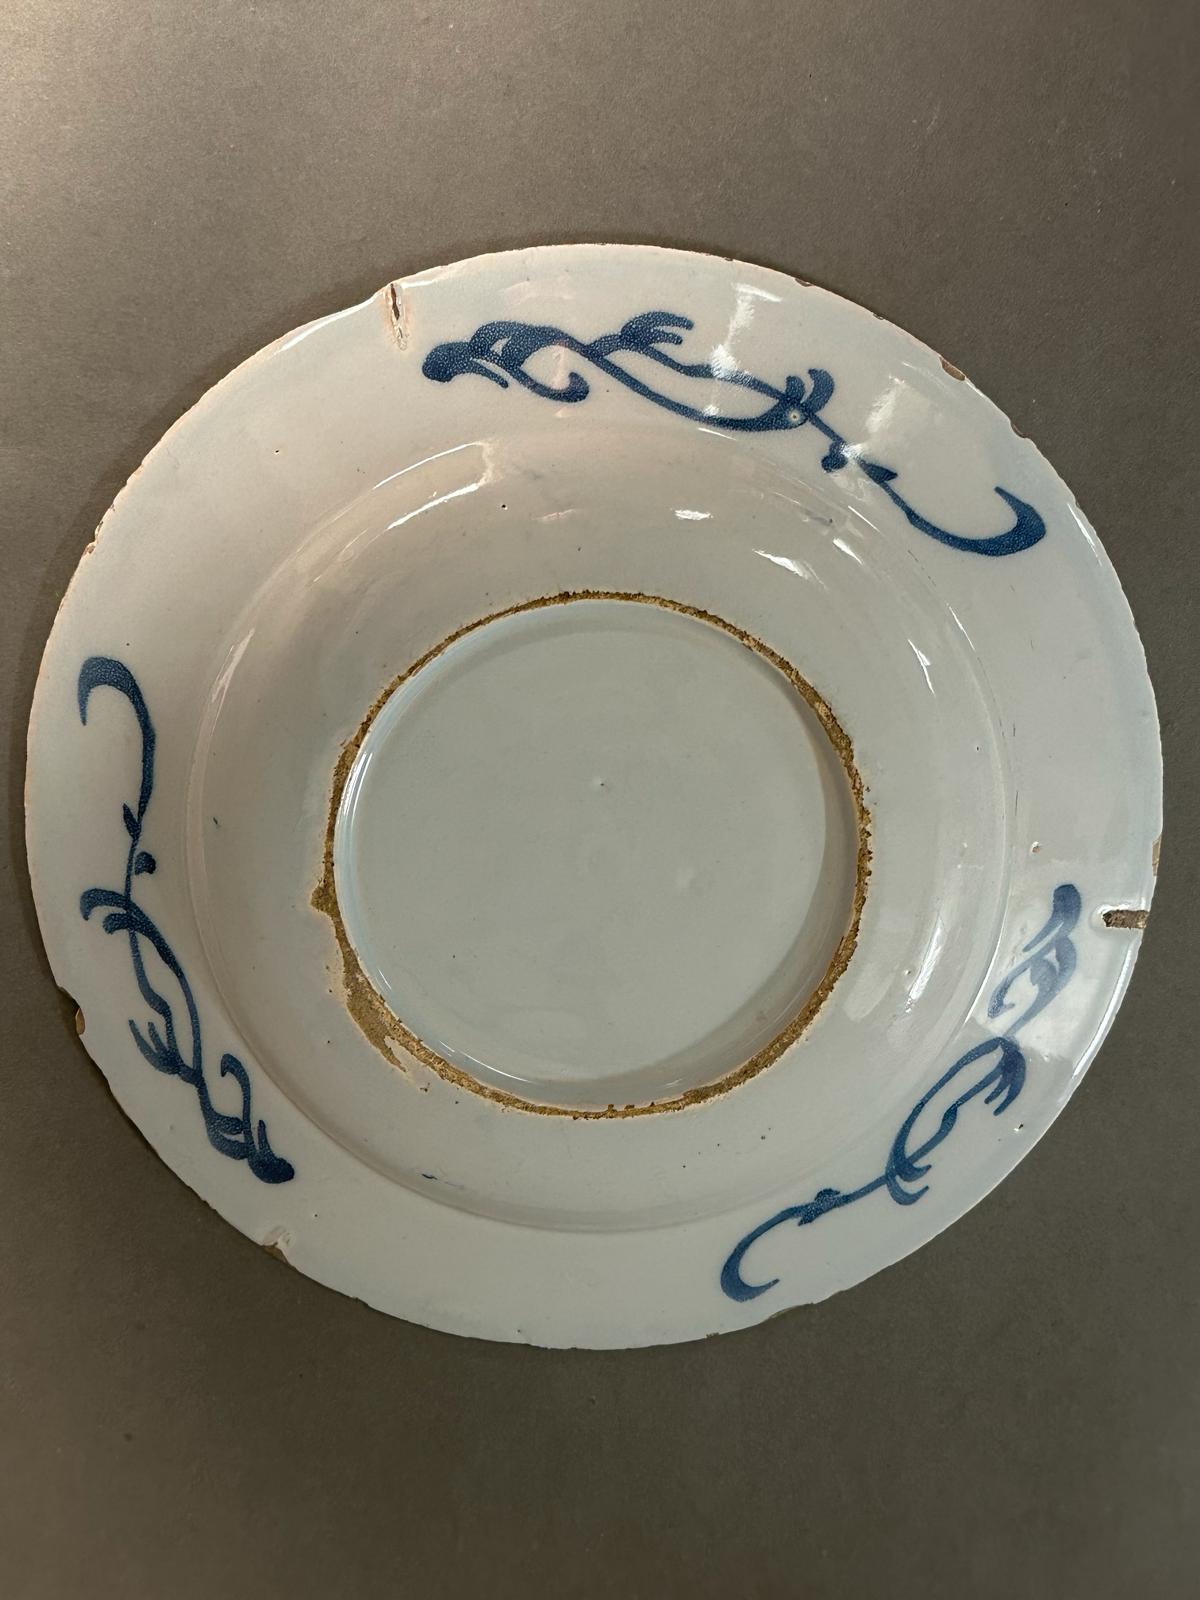 A selection of Chinese blue and white ceramic to include a plate, side plates and a small bowl - Image 6 of 12